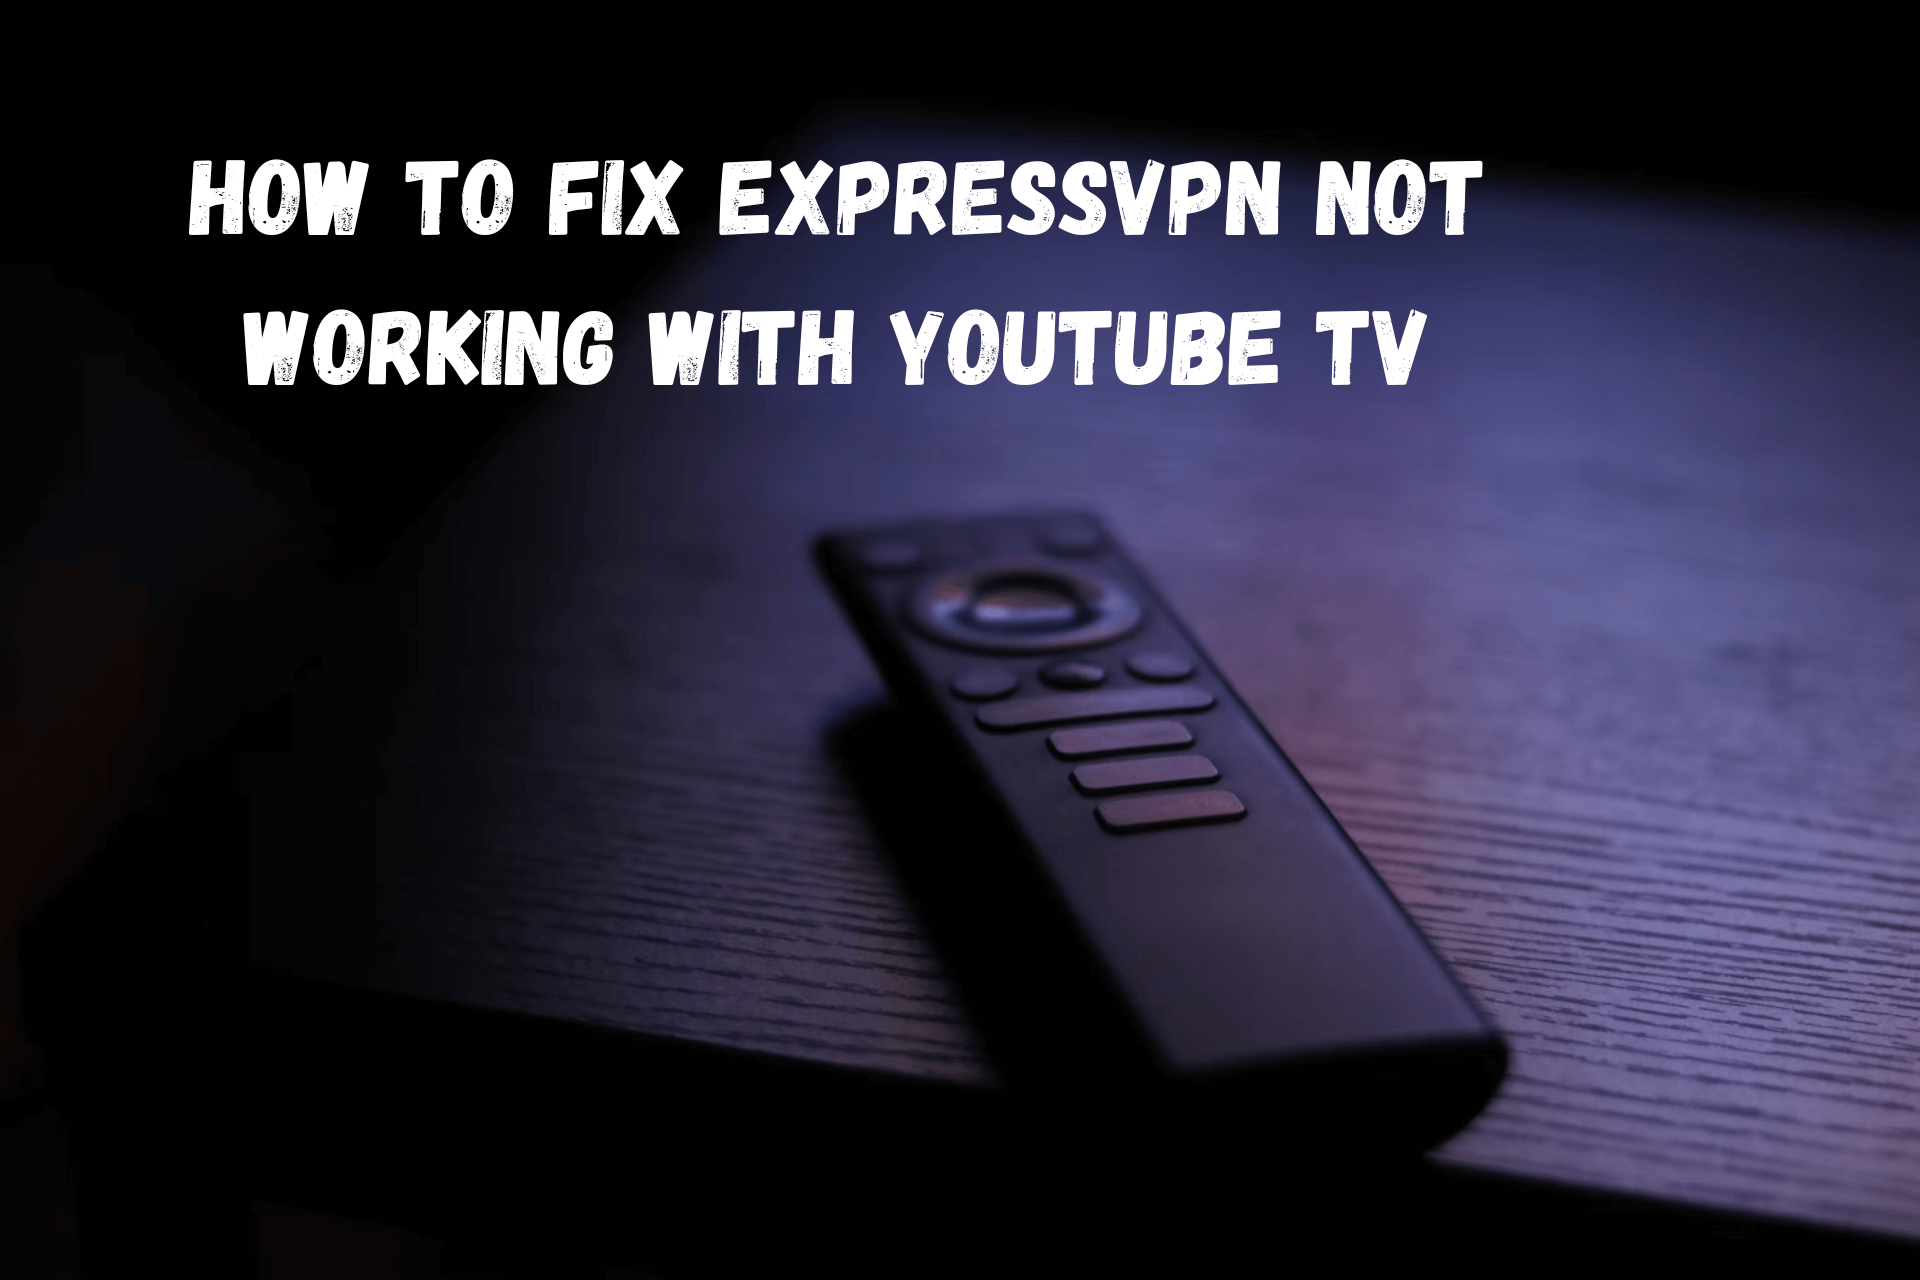 ExpressVPN Not Working With YouTube TV